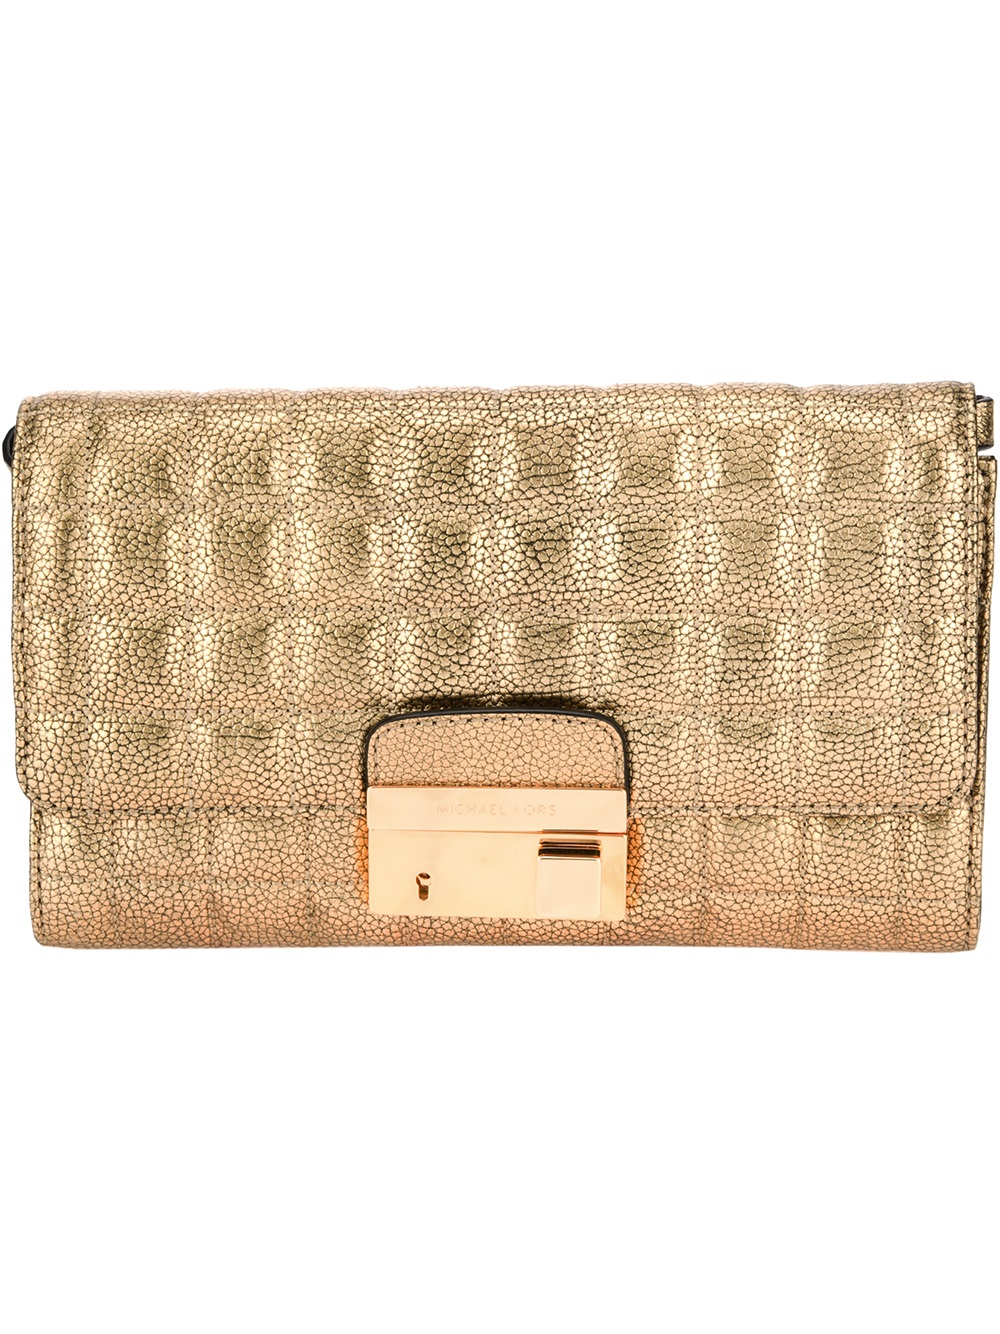 Michael Kors Gia Quilted Clutch in Gold (metallic) | Lyst